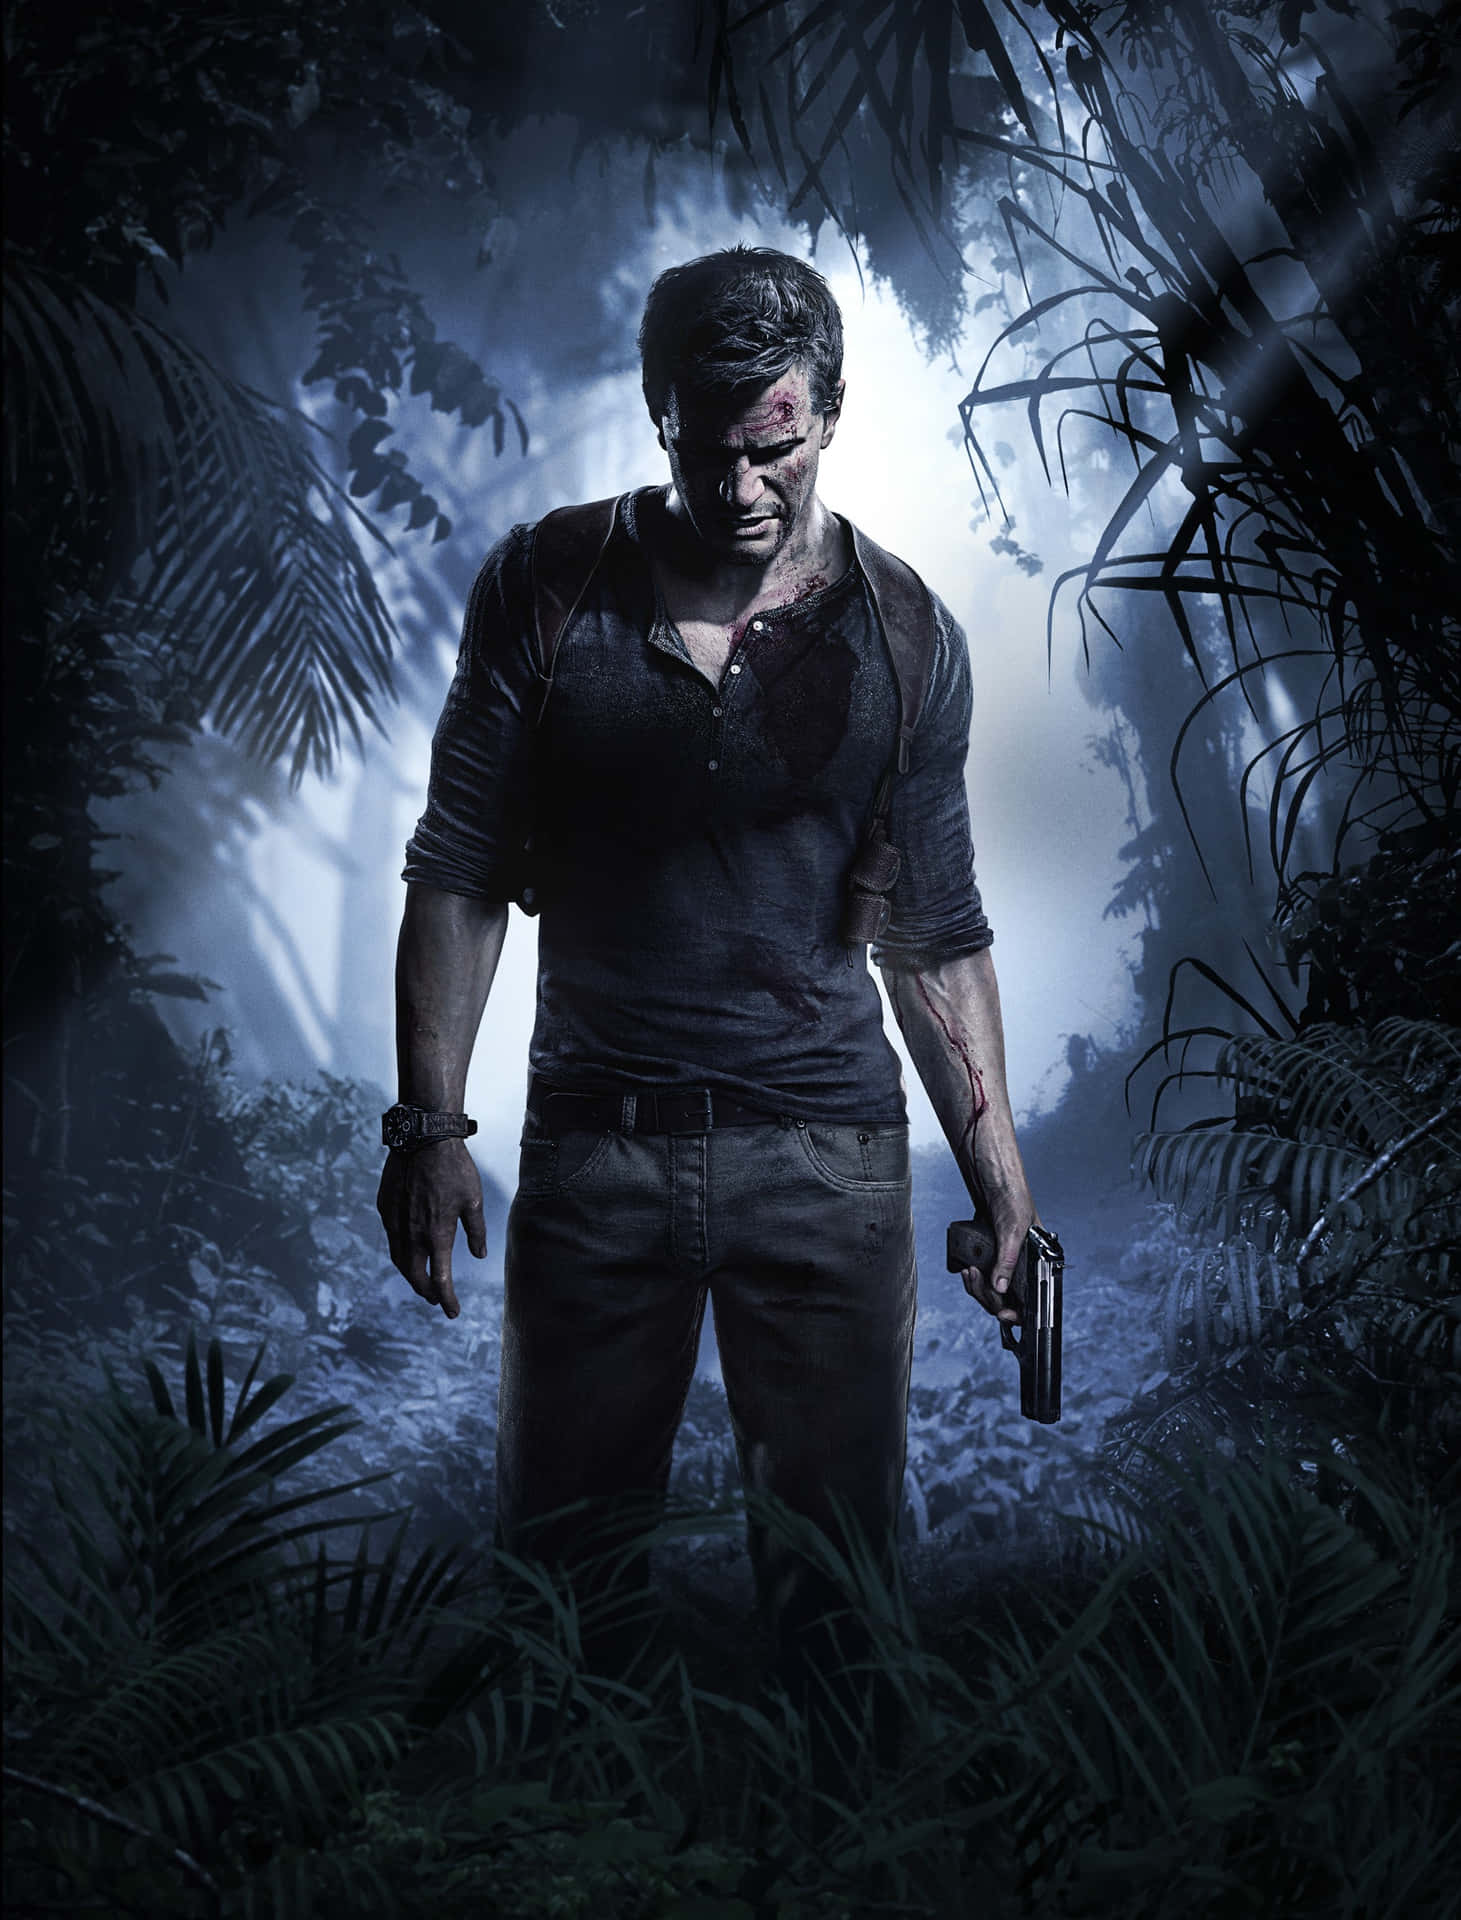 Uncharted 4 - Pc - Pc - Pc - Pc - Pc - Wallpaper